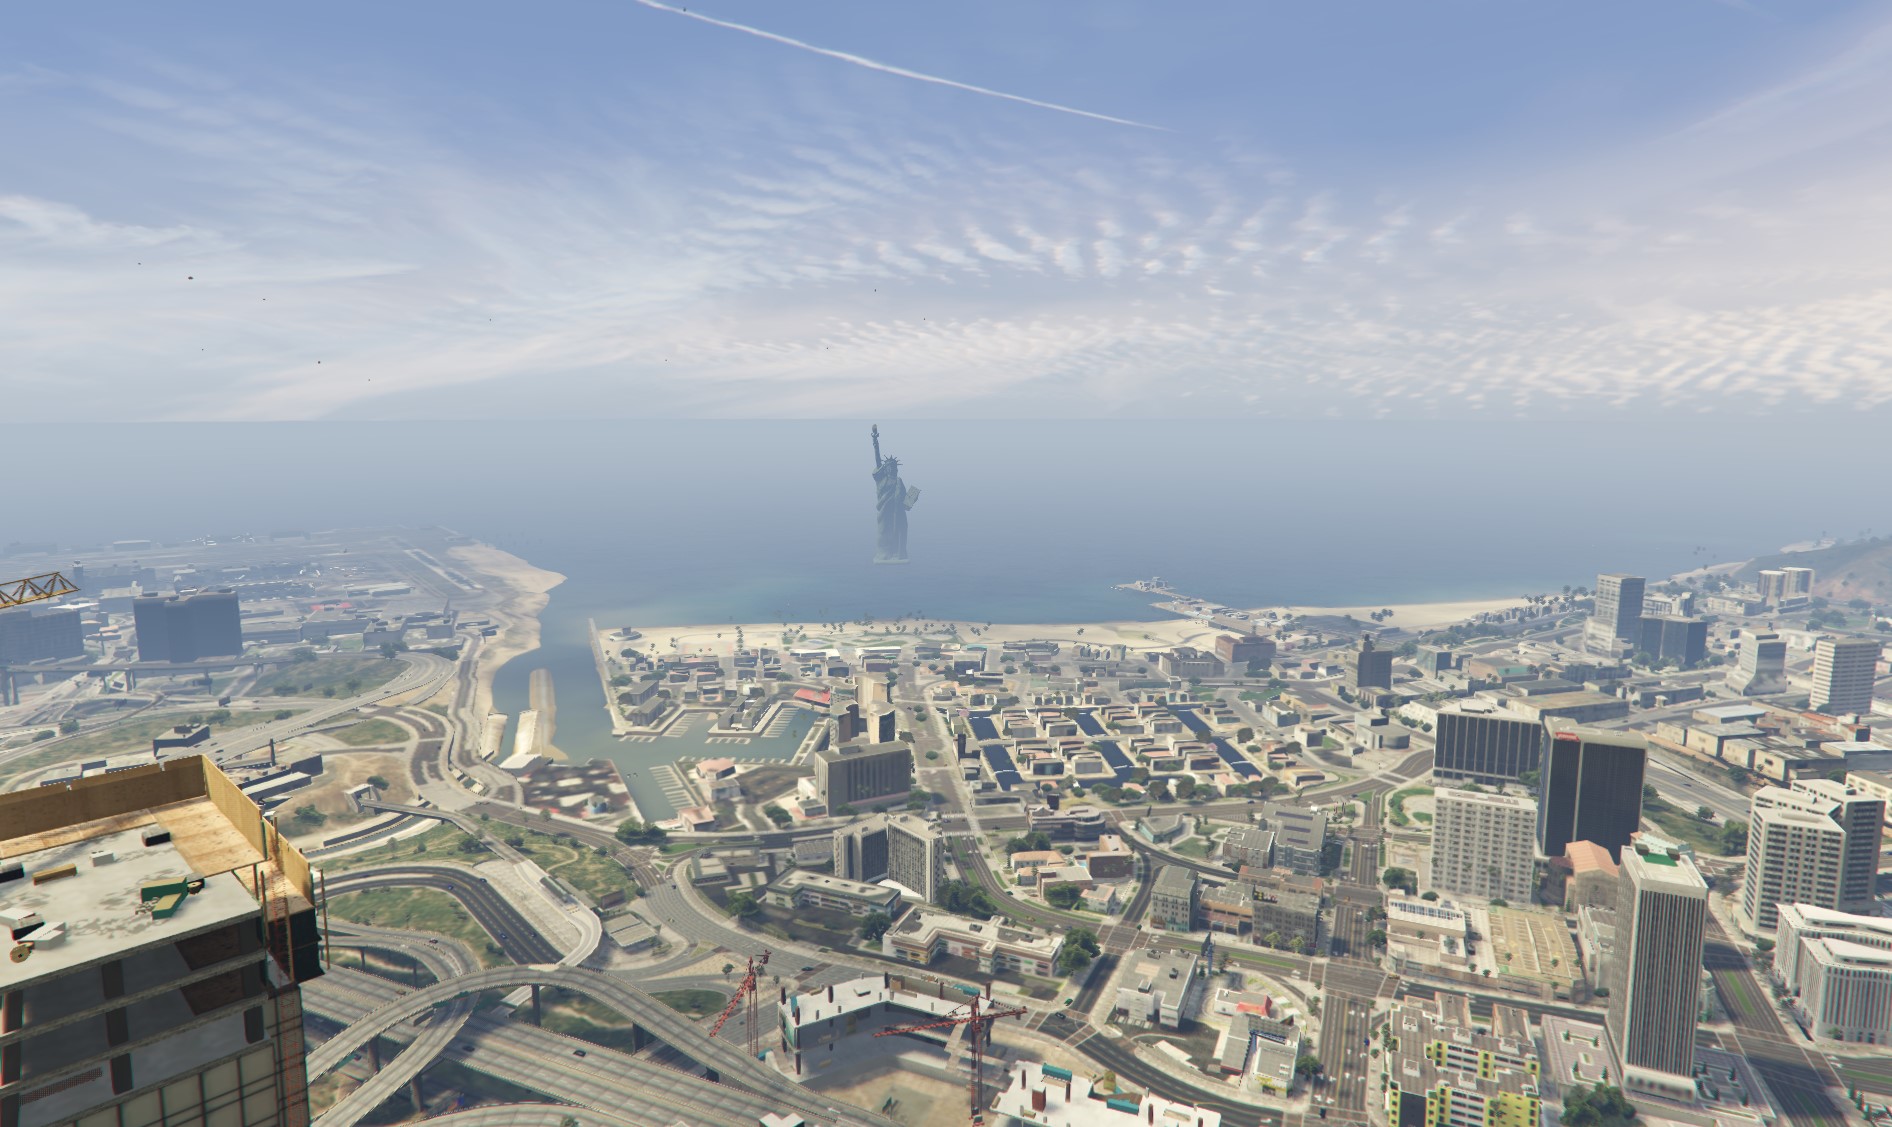 GTA V-FIVEM] Going Merry - One Piece [MAP-FREE] - Releases - Cfx.re  Community